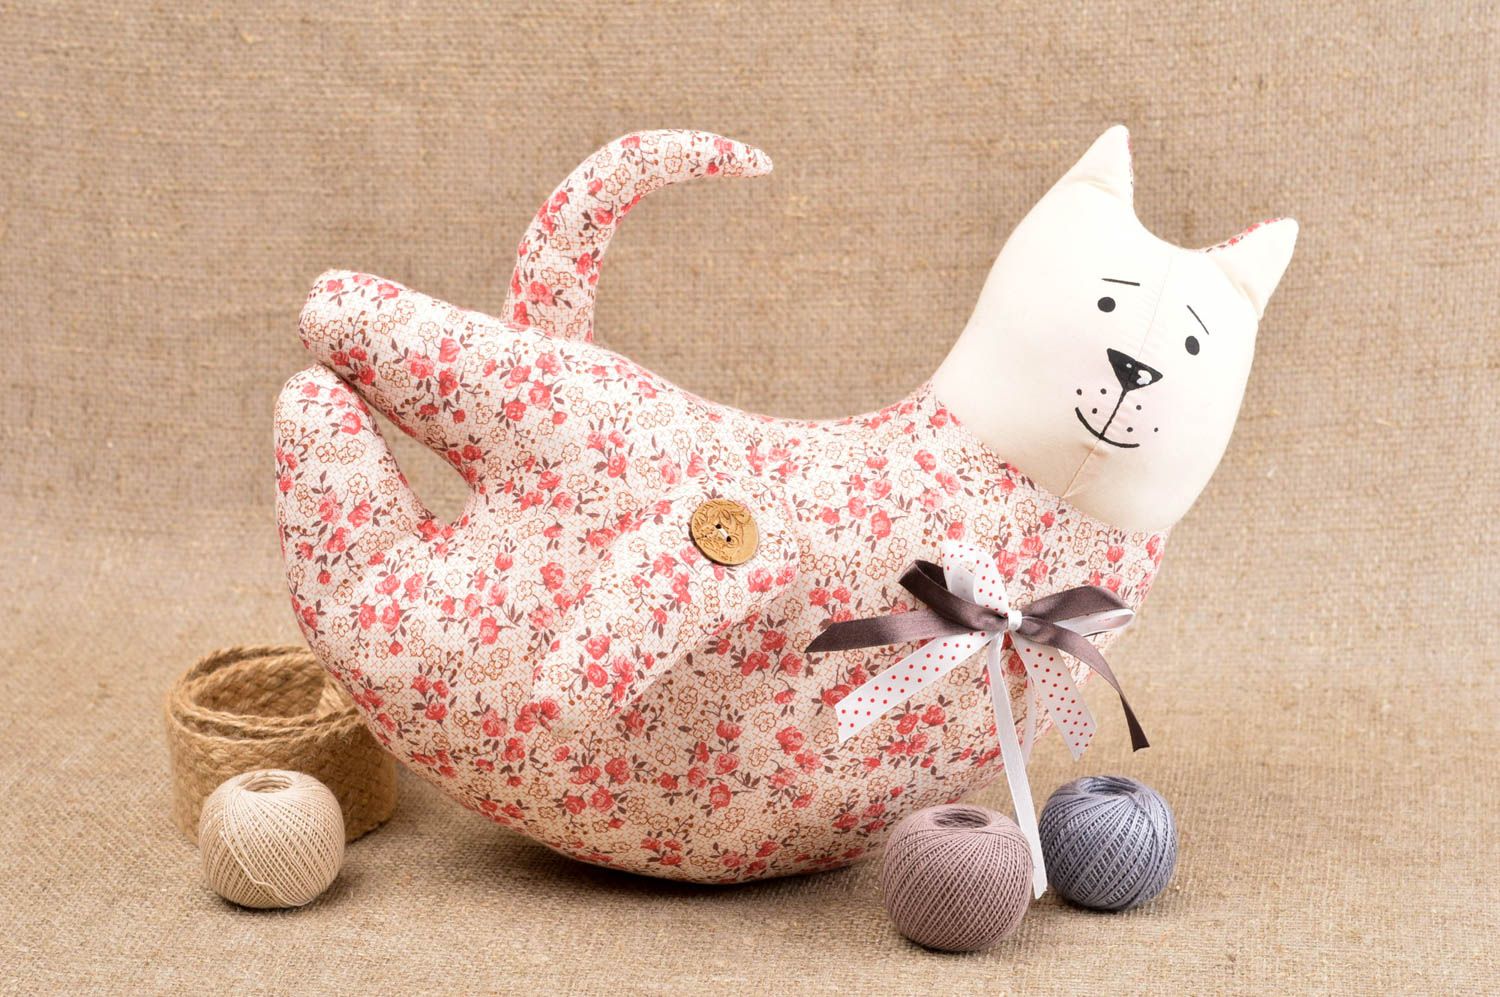 Unusual handmade fabric soft toy living room designs best toys for kids photo 1